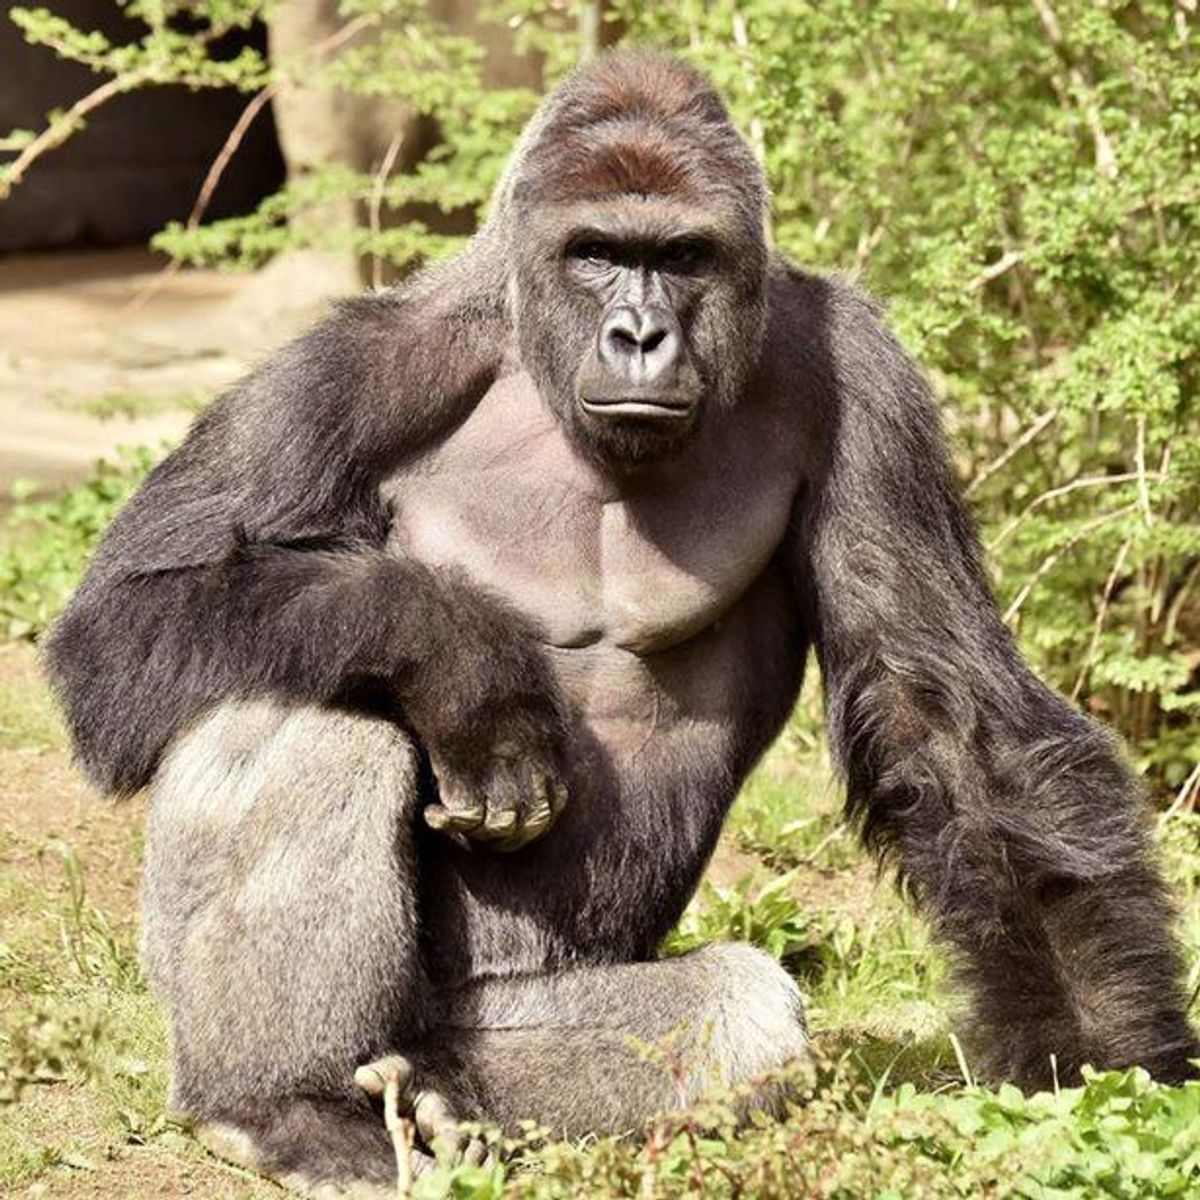 Let Harambe Rest, Focus On Real Issues